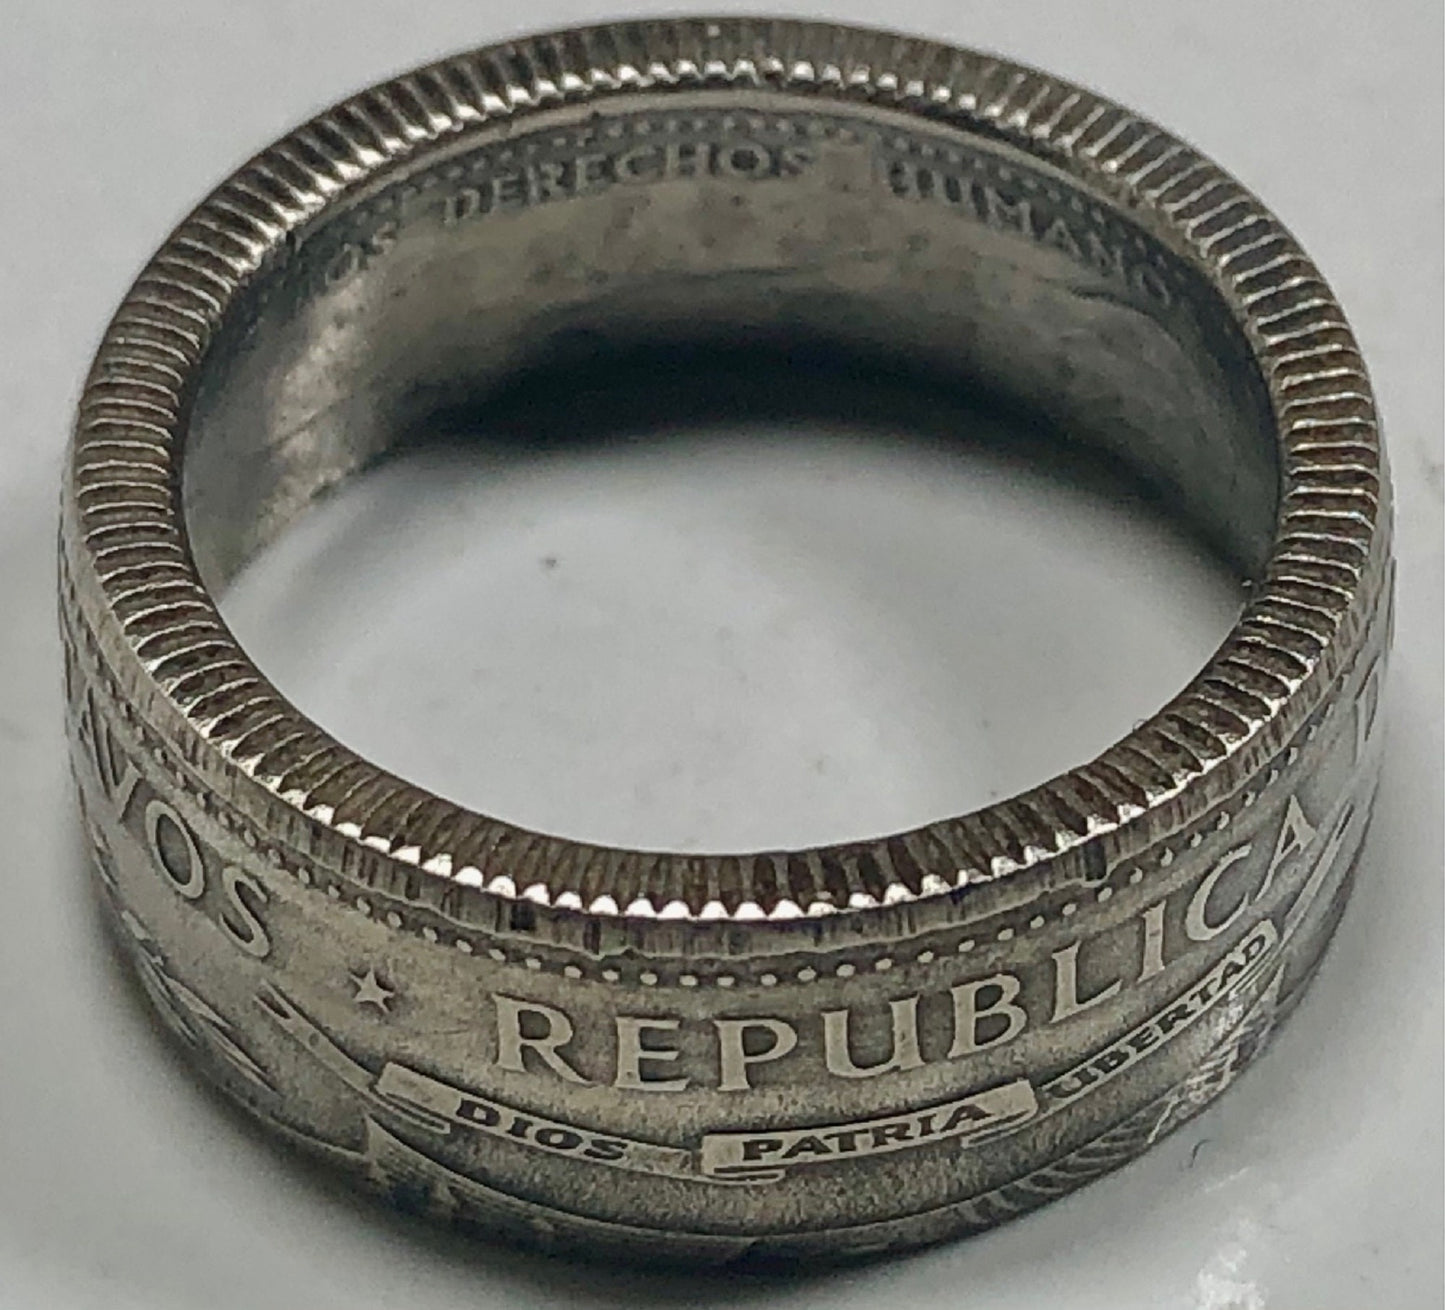 Dominican Republic Coin Ring 25 Centavos Handmade Personal Charm Custom Ring Gift For Friend Coin Ring Gift For Him Her World Coin Collector